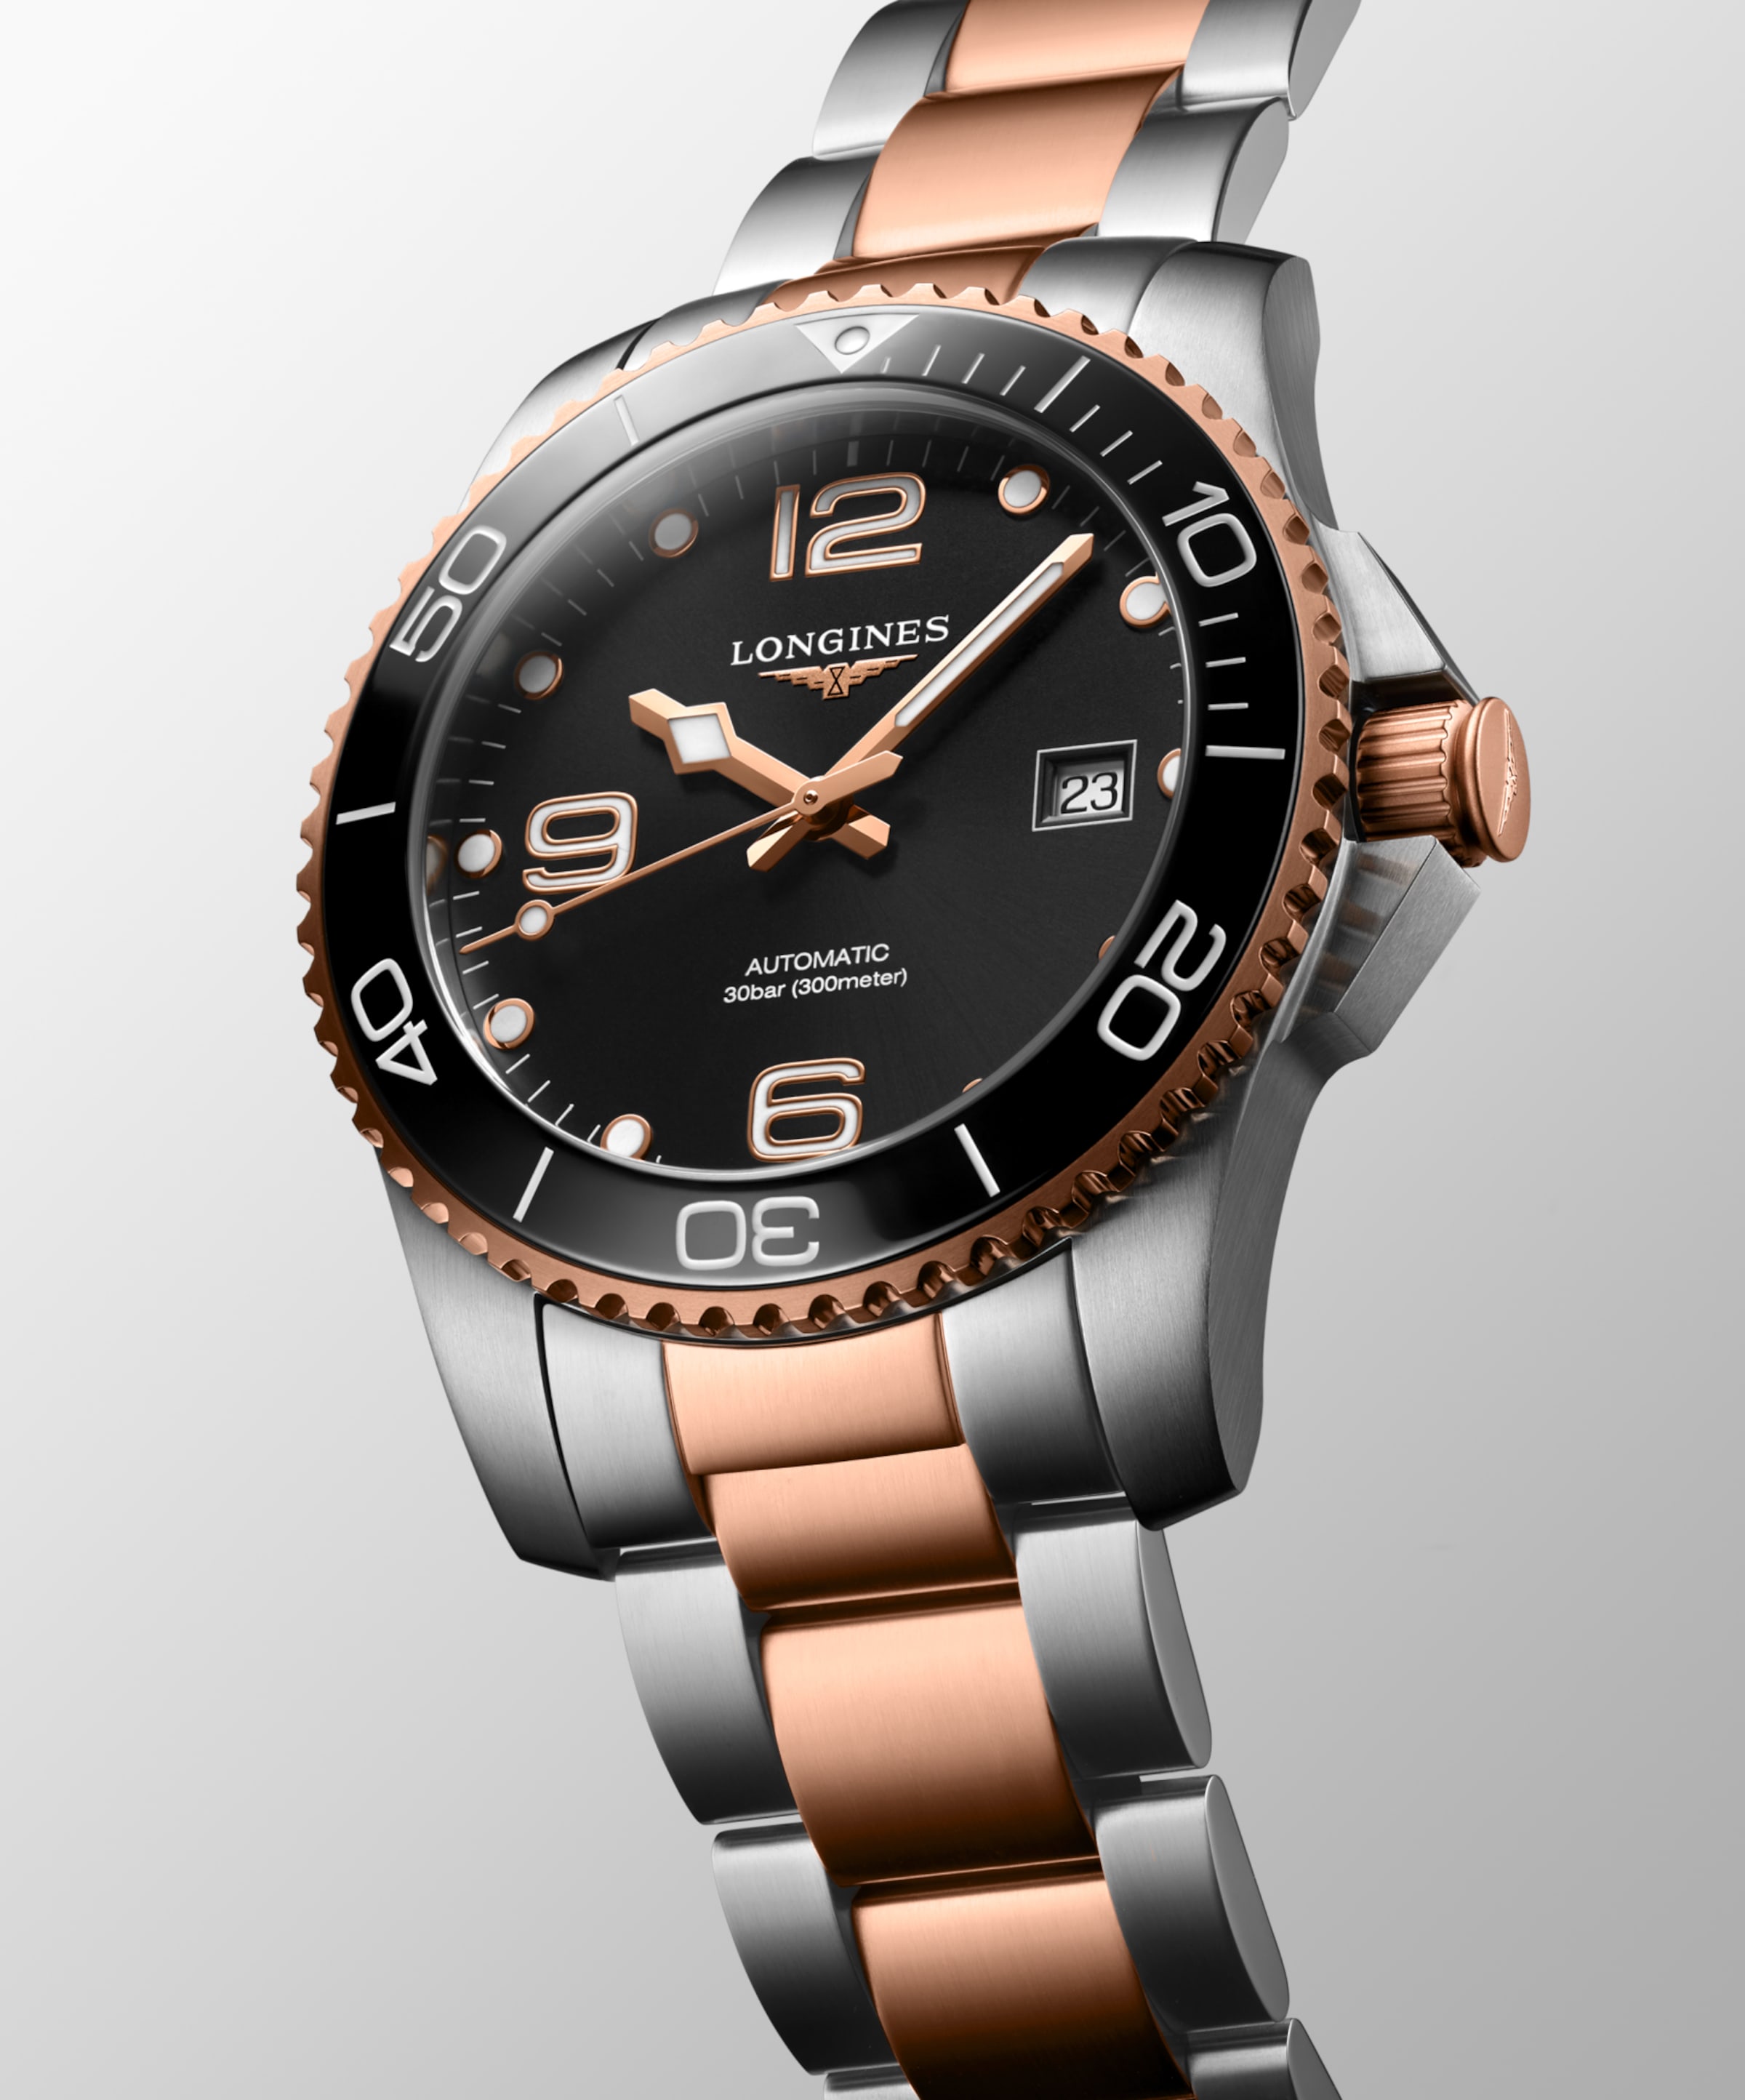 Longines HYDROCONQUEST Automatic Stainless steel and ceramic bezel Watch - L3.781.3.58.7